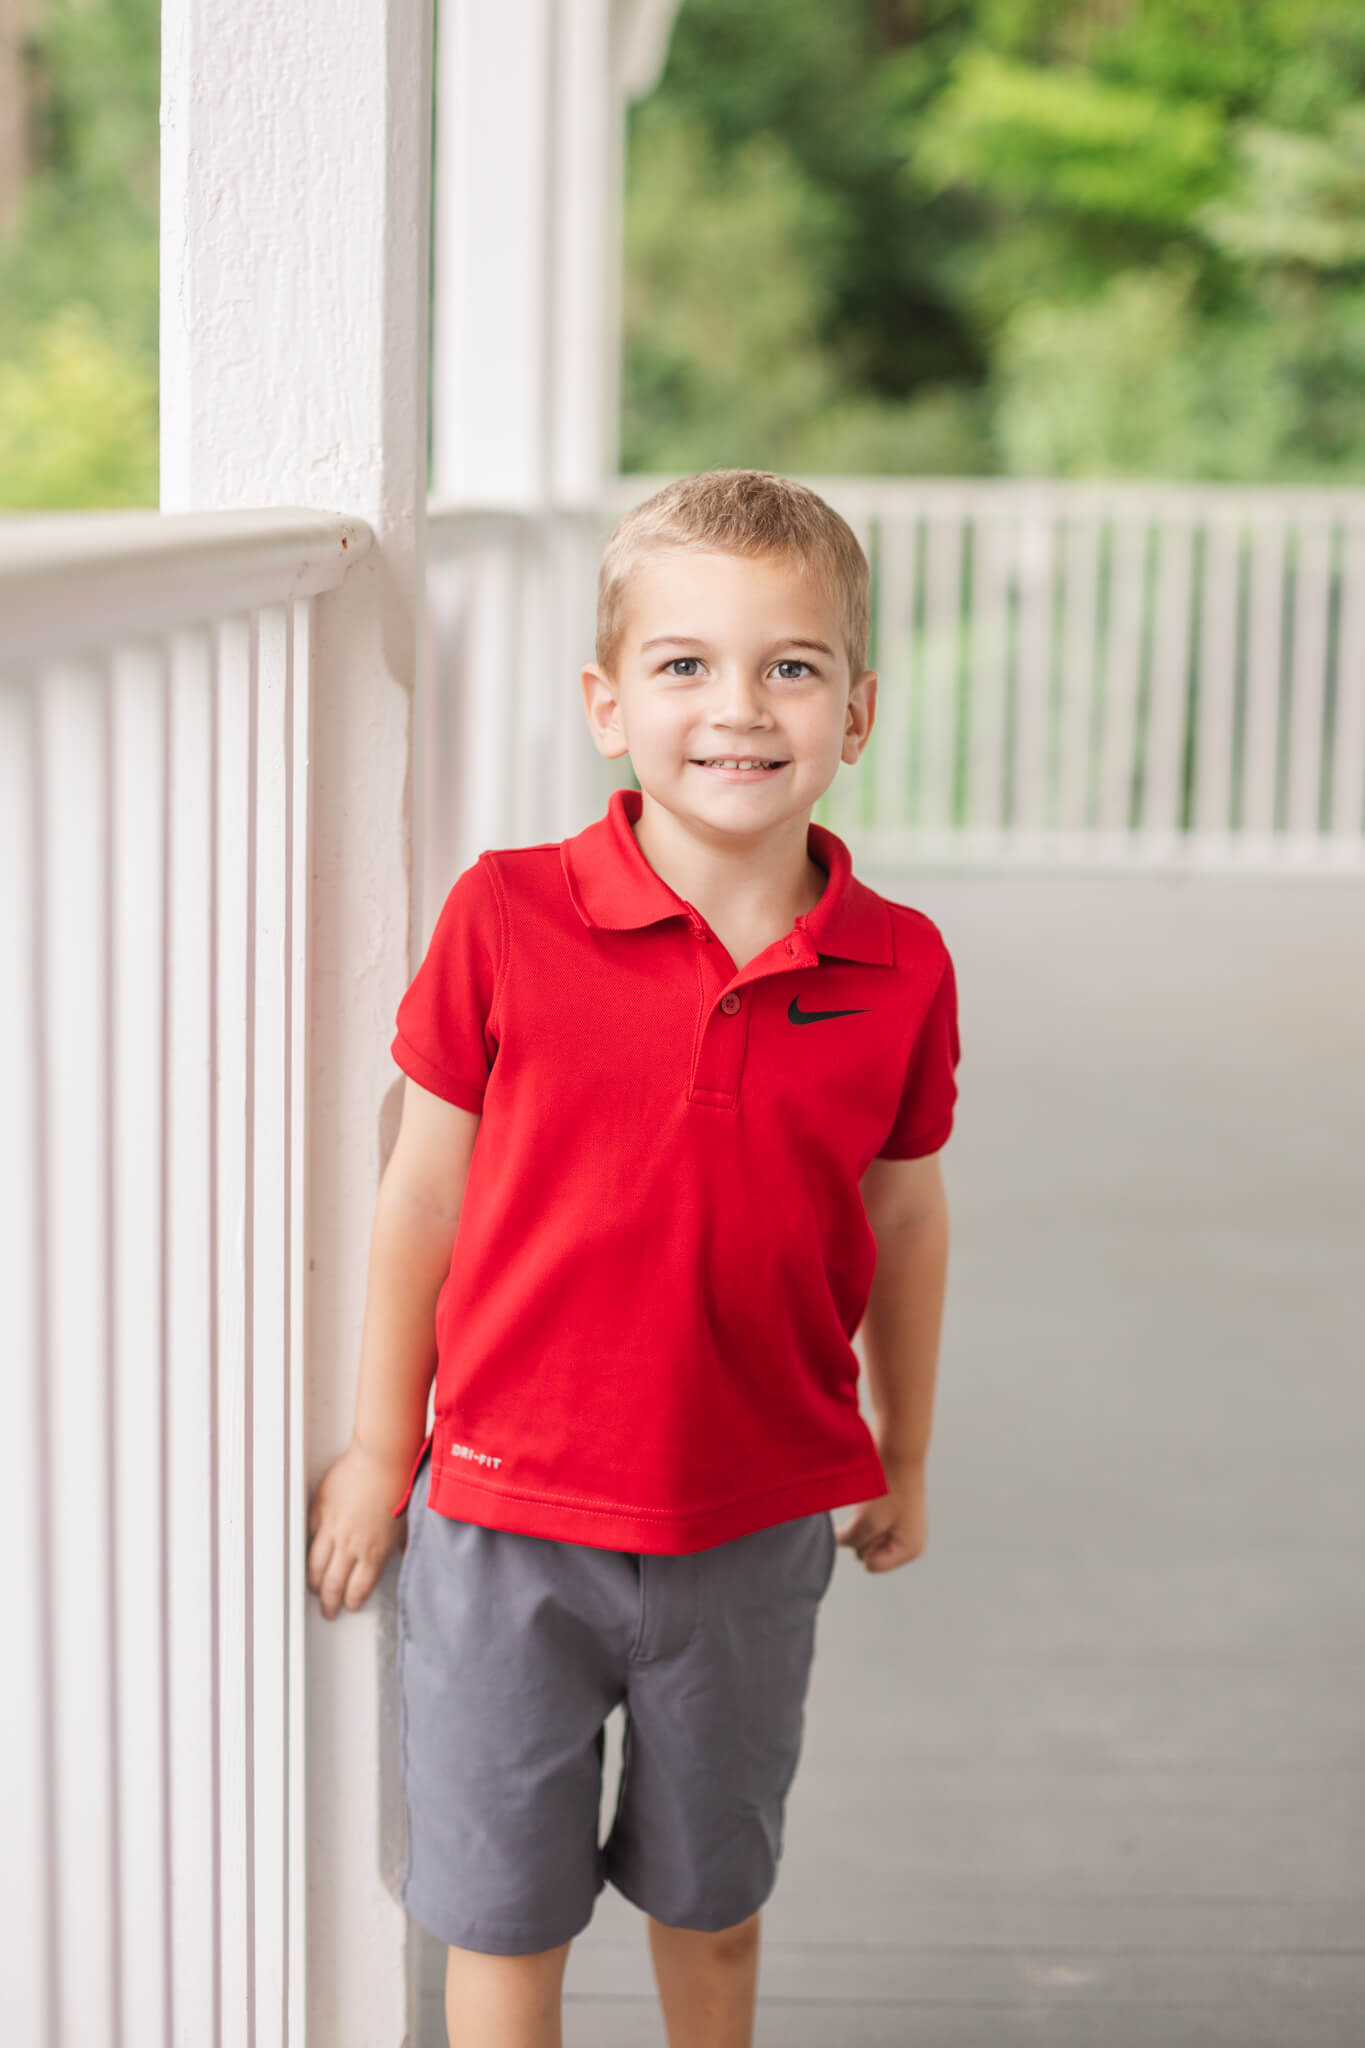 Little boy in red shirt and grey shorts smiling on a porch Southern Smiles Pediatric Dentistry